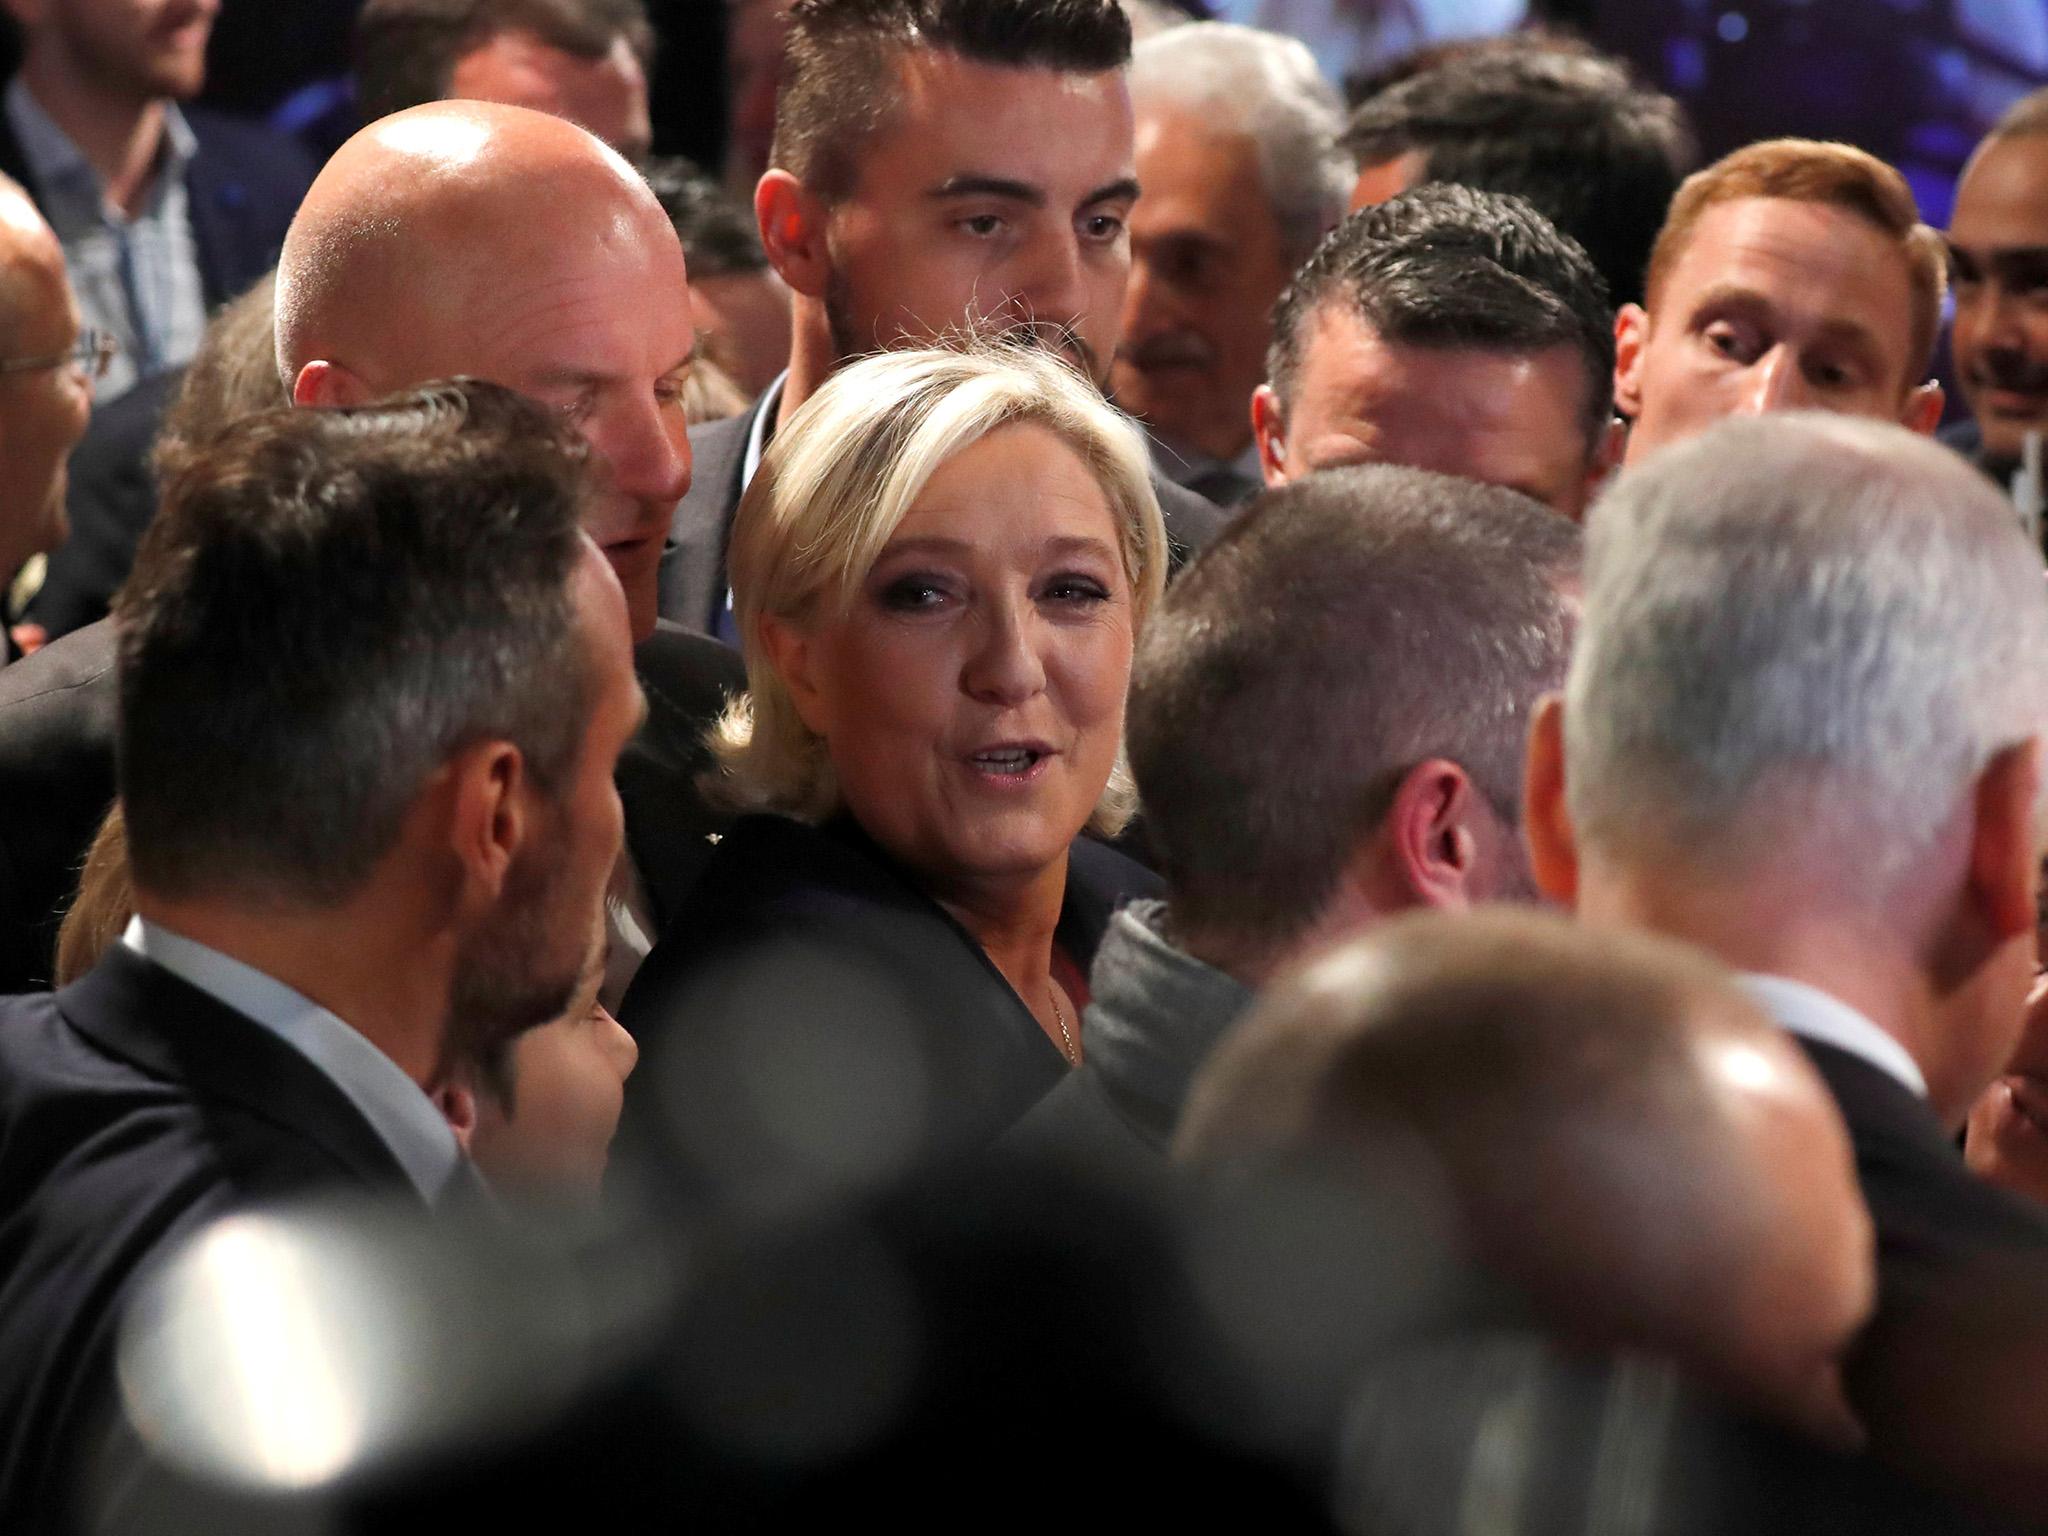 Marine Le Pen, French National Front (FN) political party candidate for French 2017 presidential election, greets supporters at the Chalet du Lac in the Bois de Vincennes in Paris after her defeat